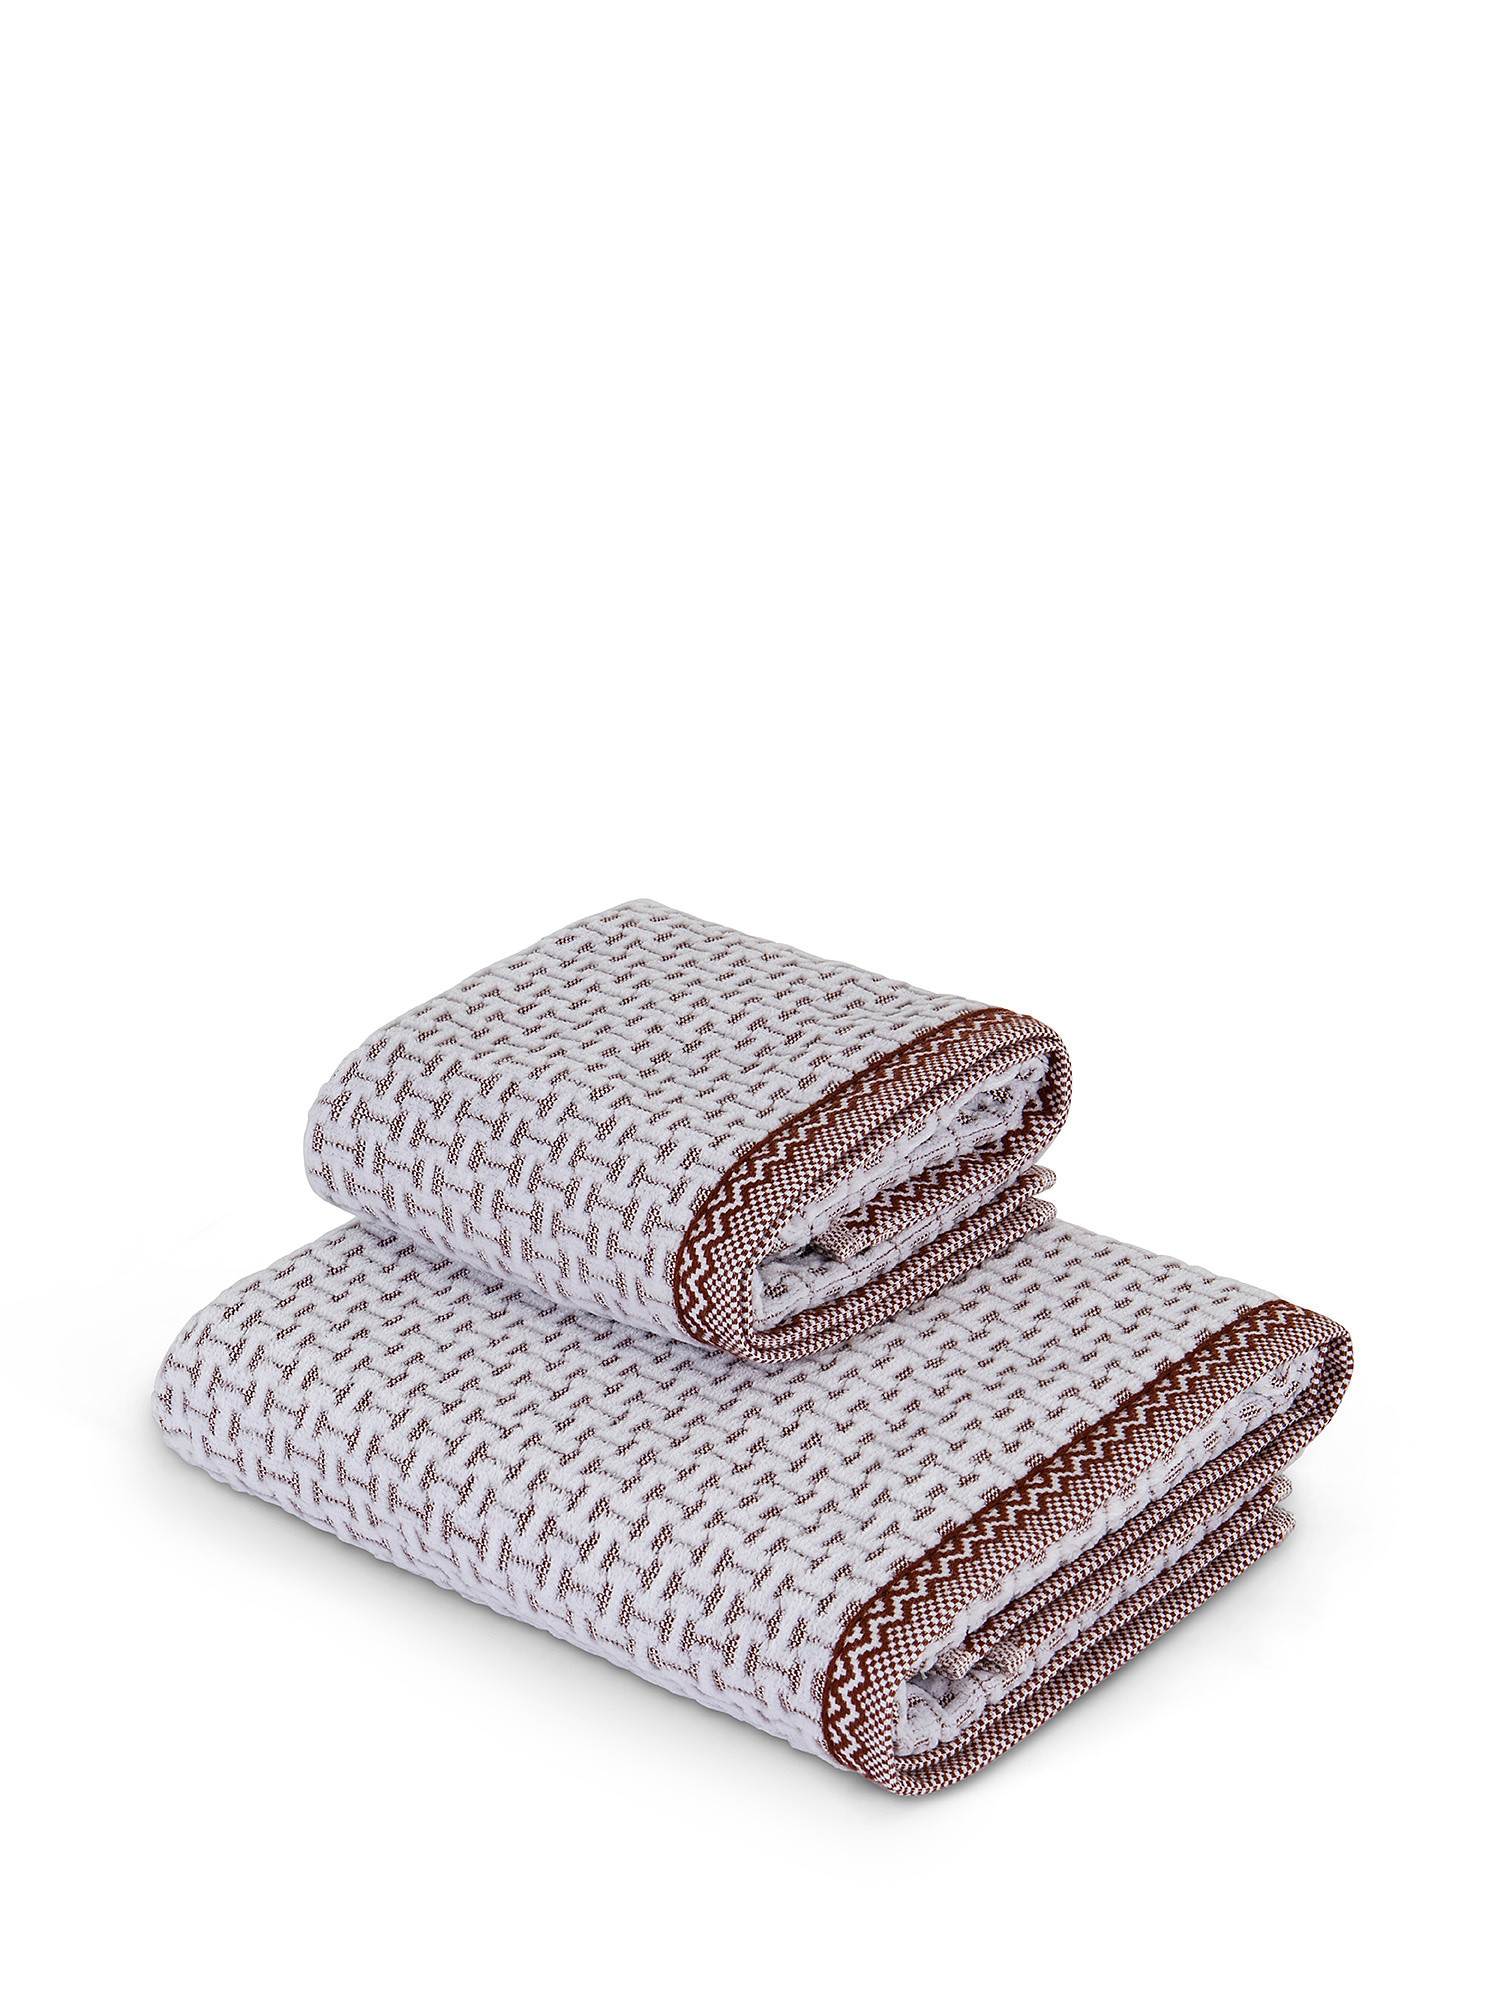 Cotton velor towel with woven pattern, Dark Red, large image number 0